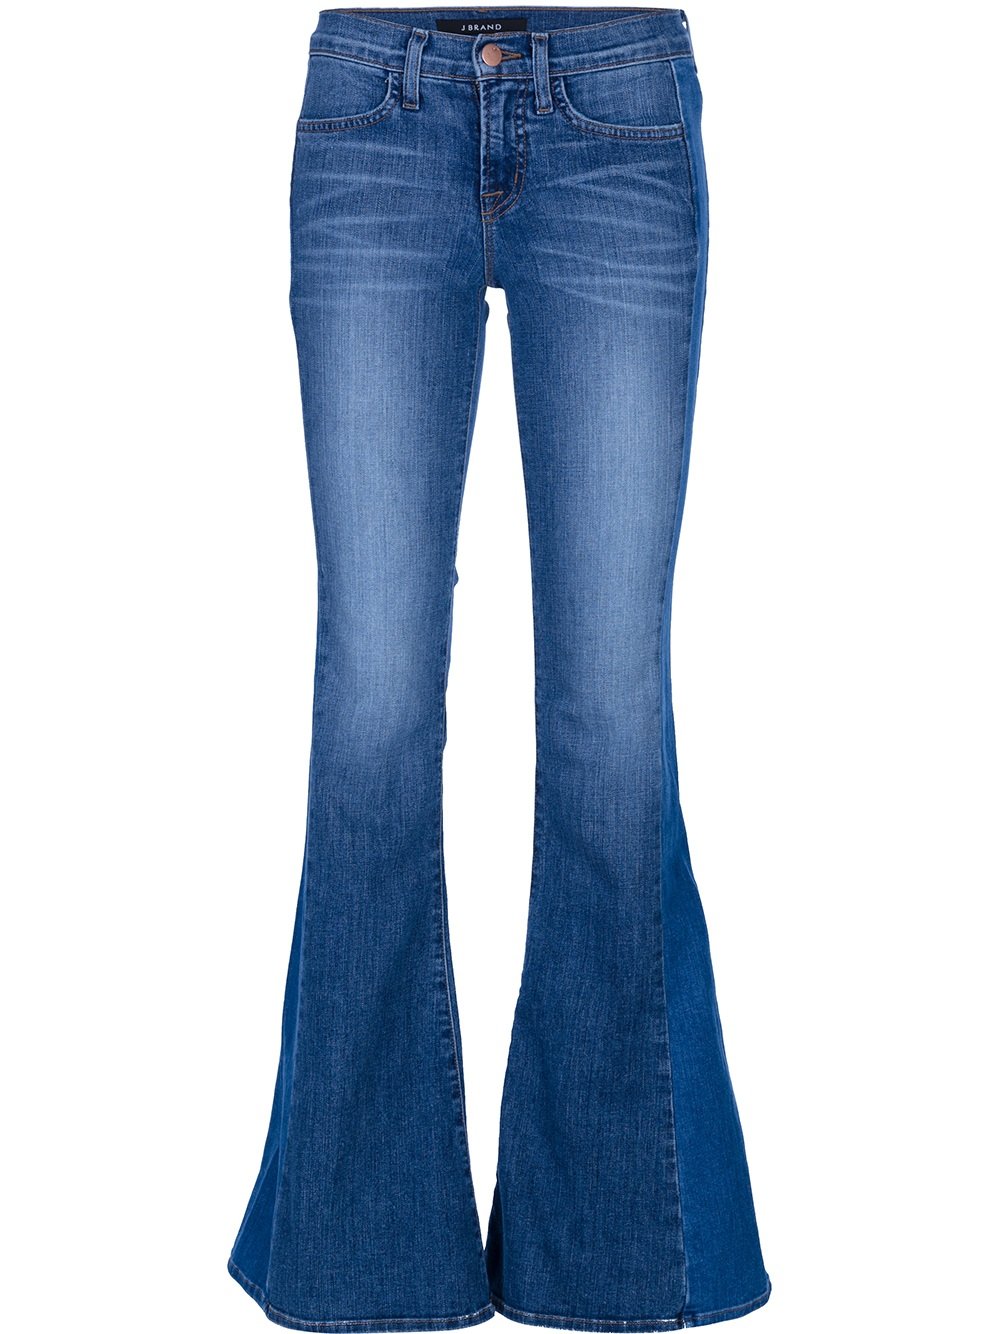 Bell Bottom / 5 Reasons To Wear Bell-Bottom Jeans - Just That Tall Girl